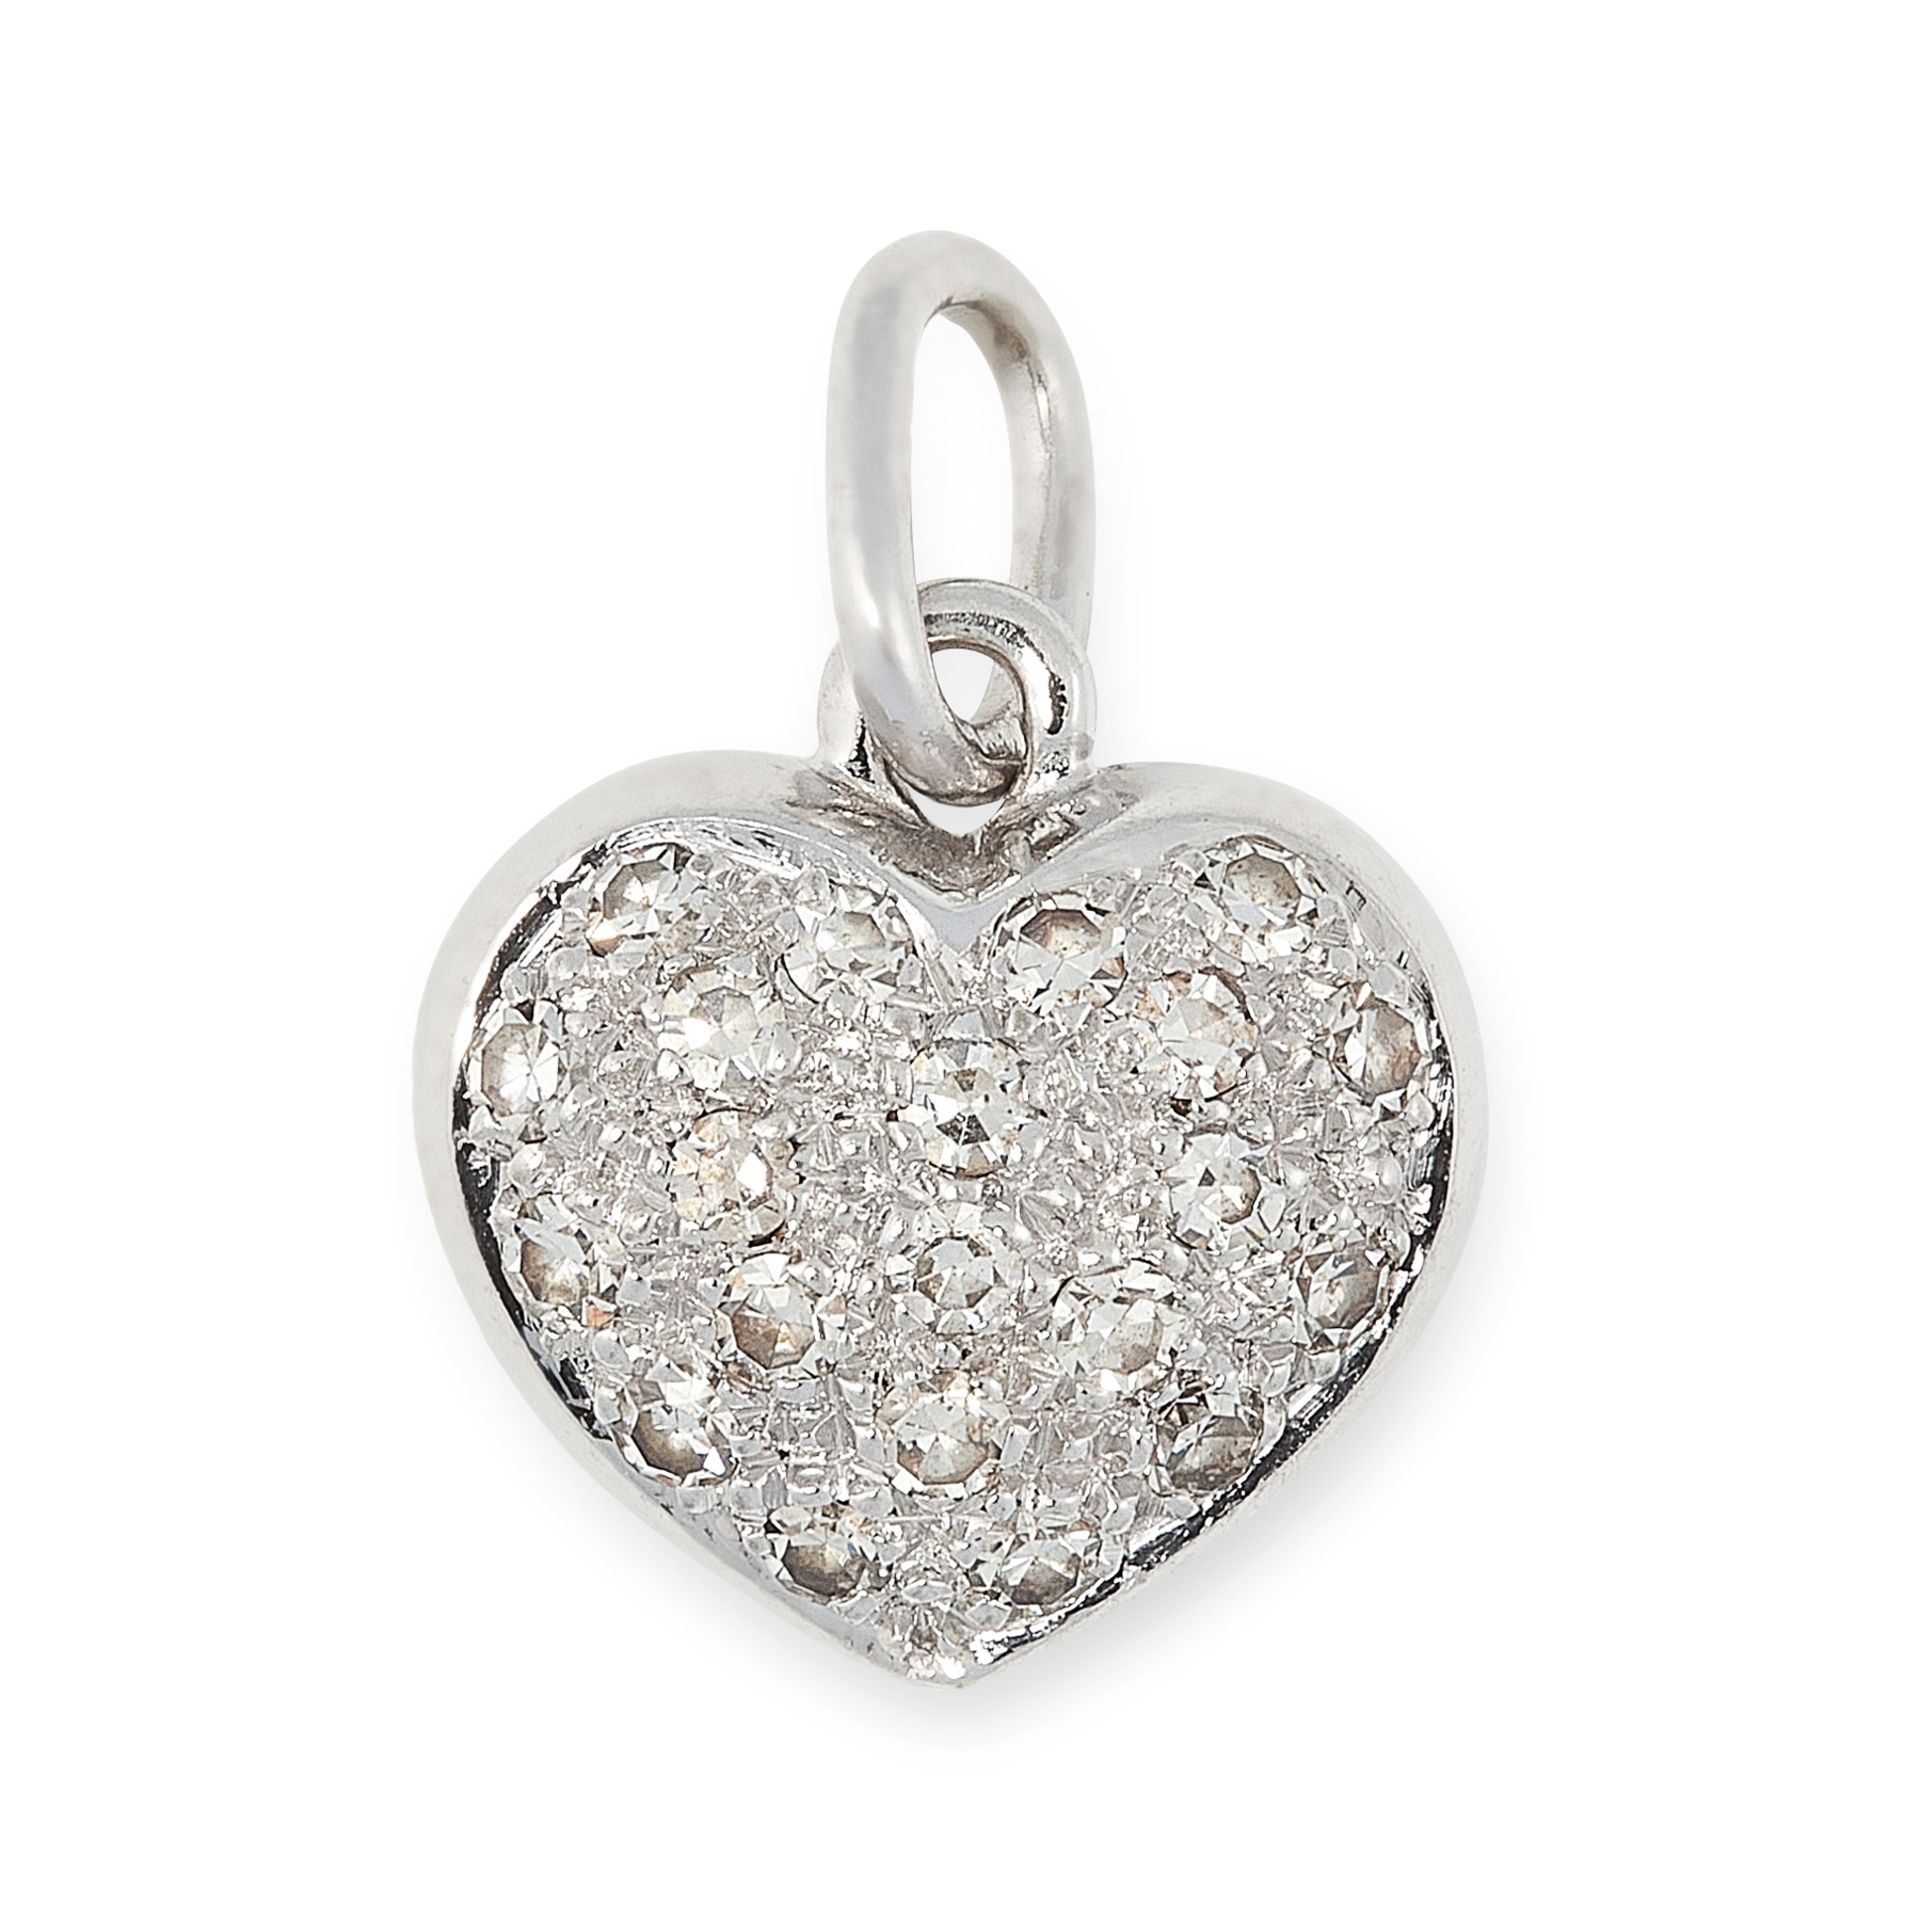 A DIAMOND HEART PENDANT / CHARM in white gold, designed as a heart pave set with round cut diamonds,